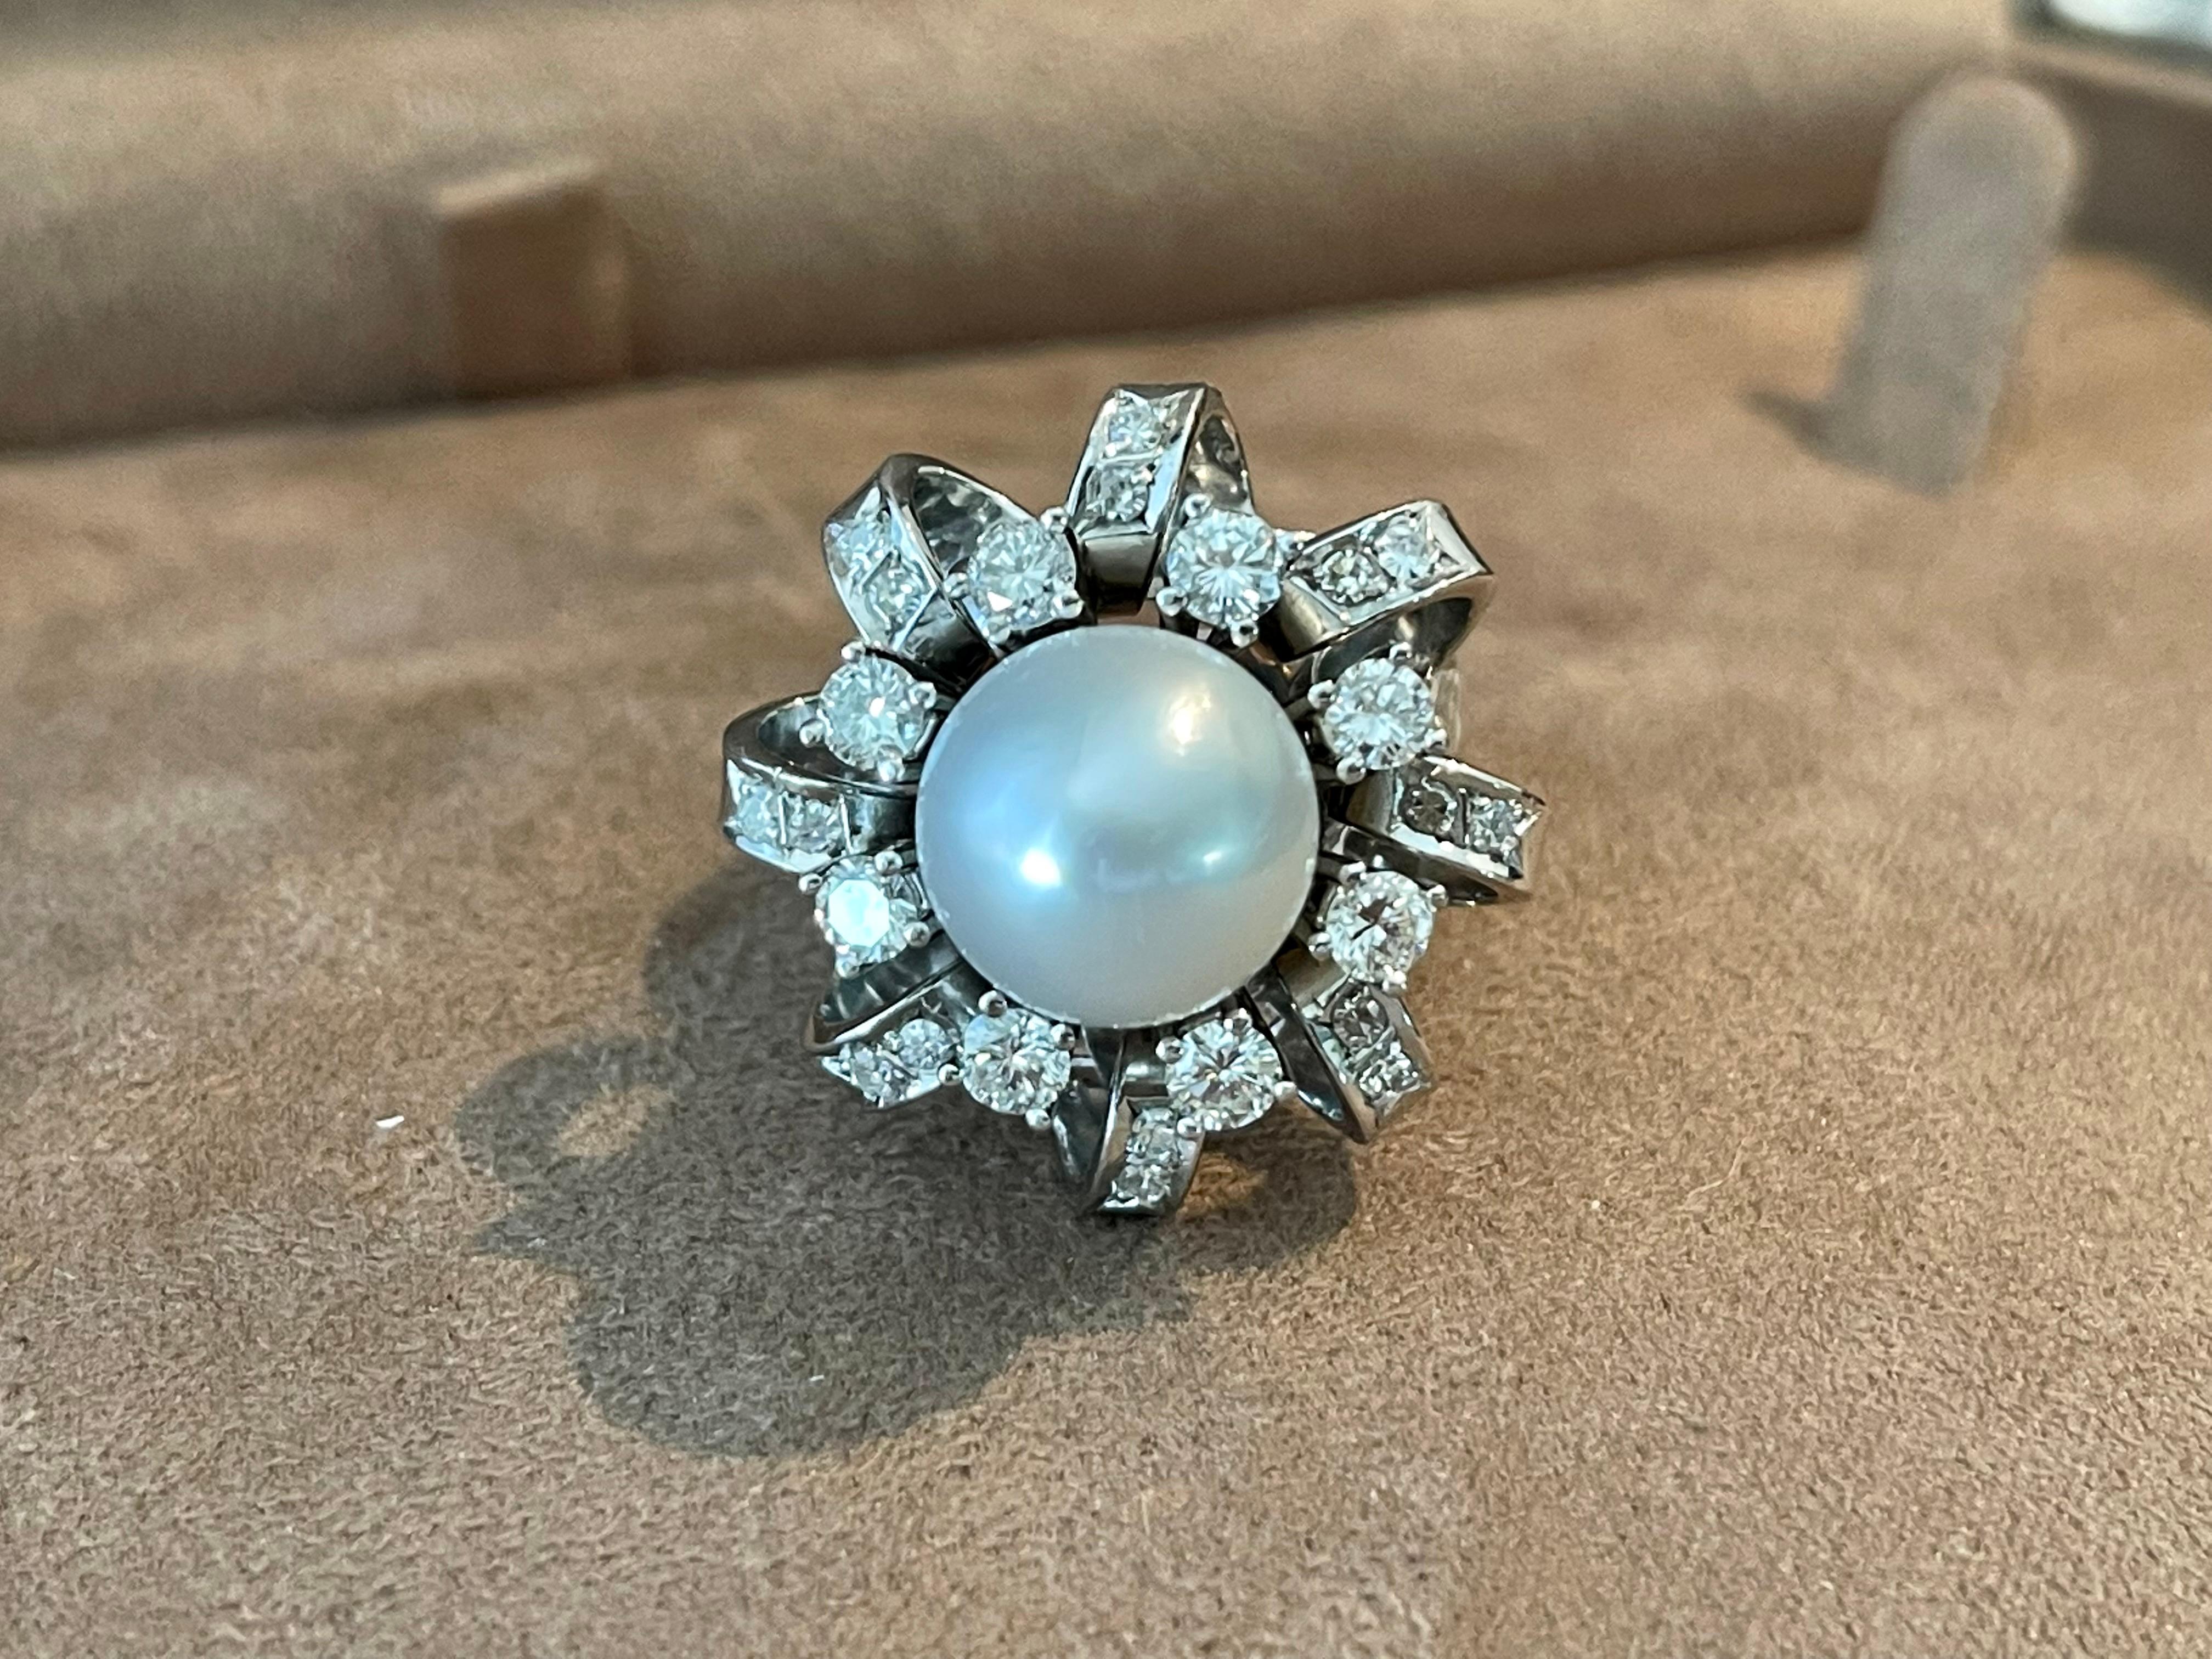 Impressive 14 K white Gold Ring  featuring a lovely white South Sea Pearl measuring approximately 11.5 mm and 24 brilliant cut Diamonds weighing approximately 1.20 ct, G color, si-P1 clarity.
The RIng is currently size 53/13( american Ring size 6.5)